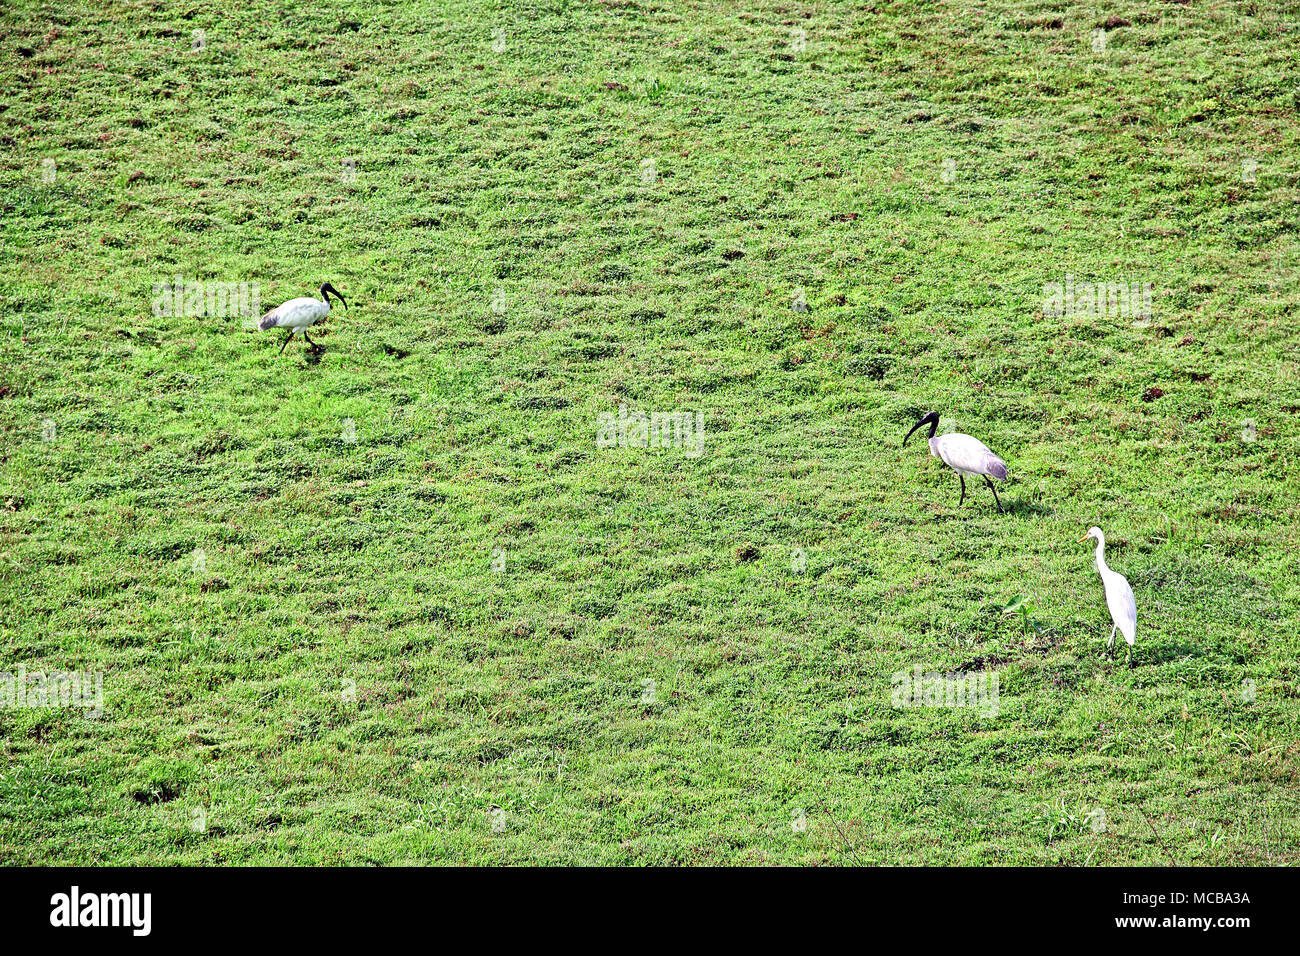 Nature background image of black-headed oriental white ibis and intermediate median egret birds searching for food in vast grassland in Kerala, India. Stock Photo